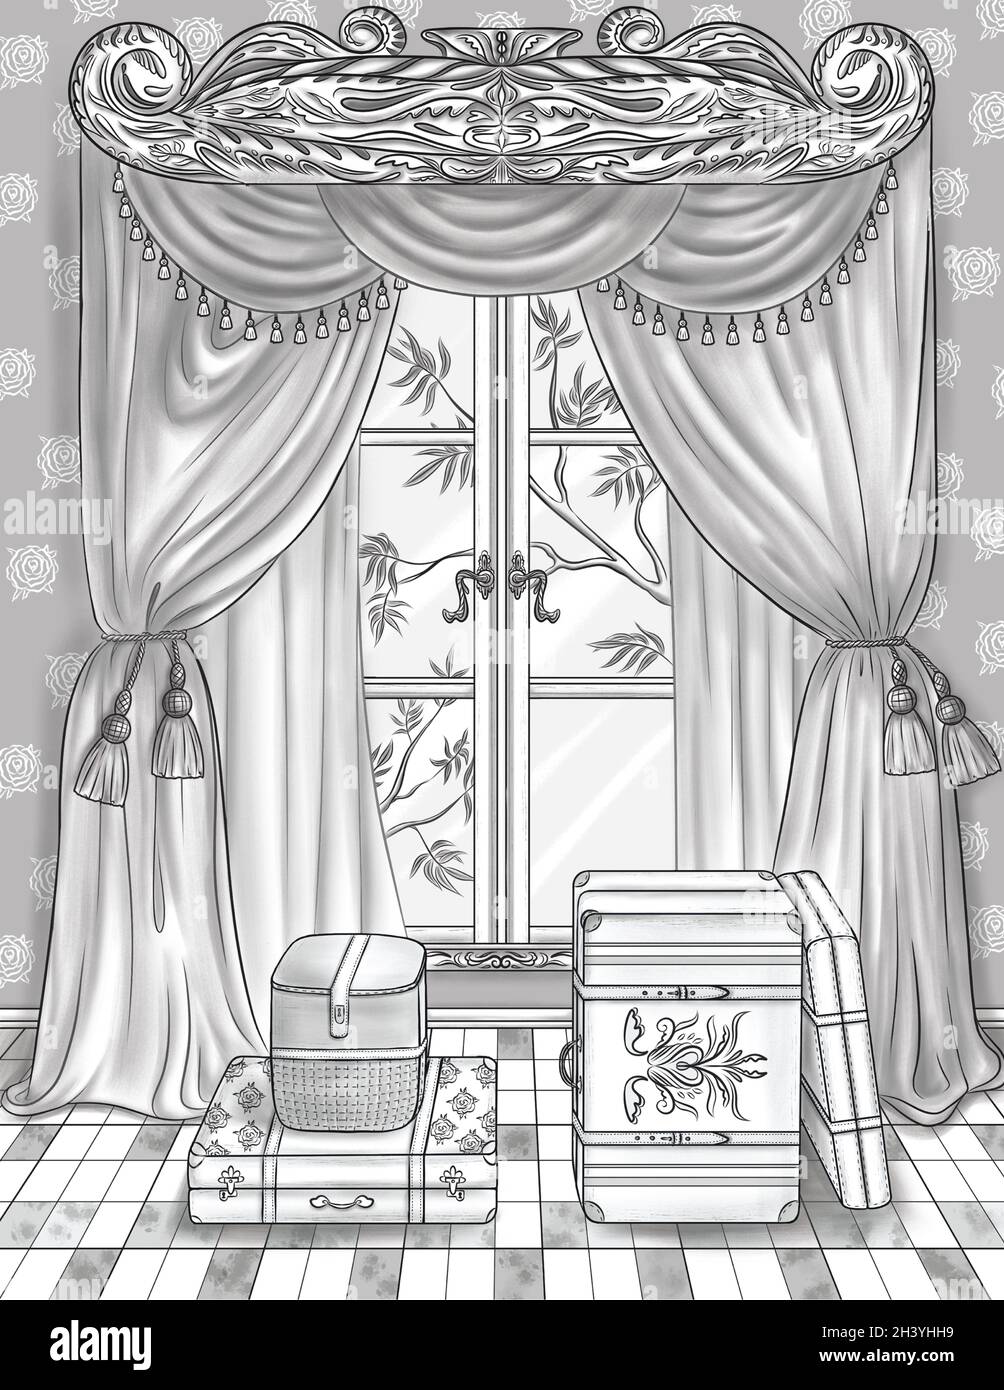 Large Glass Window With Beautiful Curtains Multiple Luggage Bags Colorless Line Drawing. Big Glass Framework With Pane And Drape Stock Photo